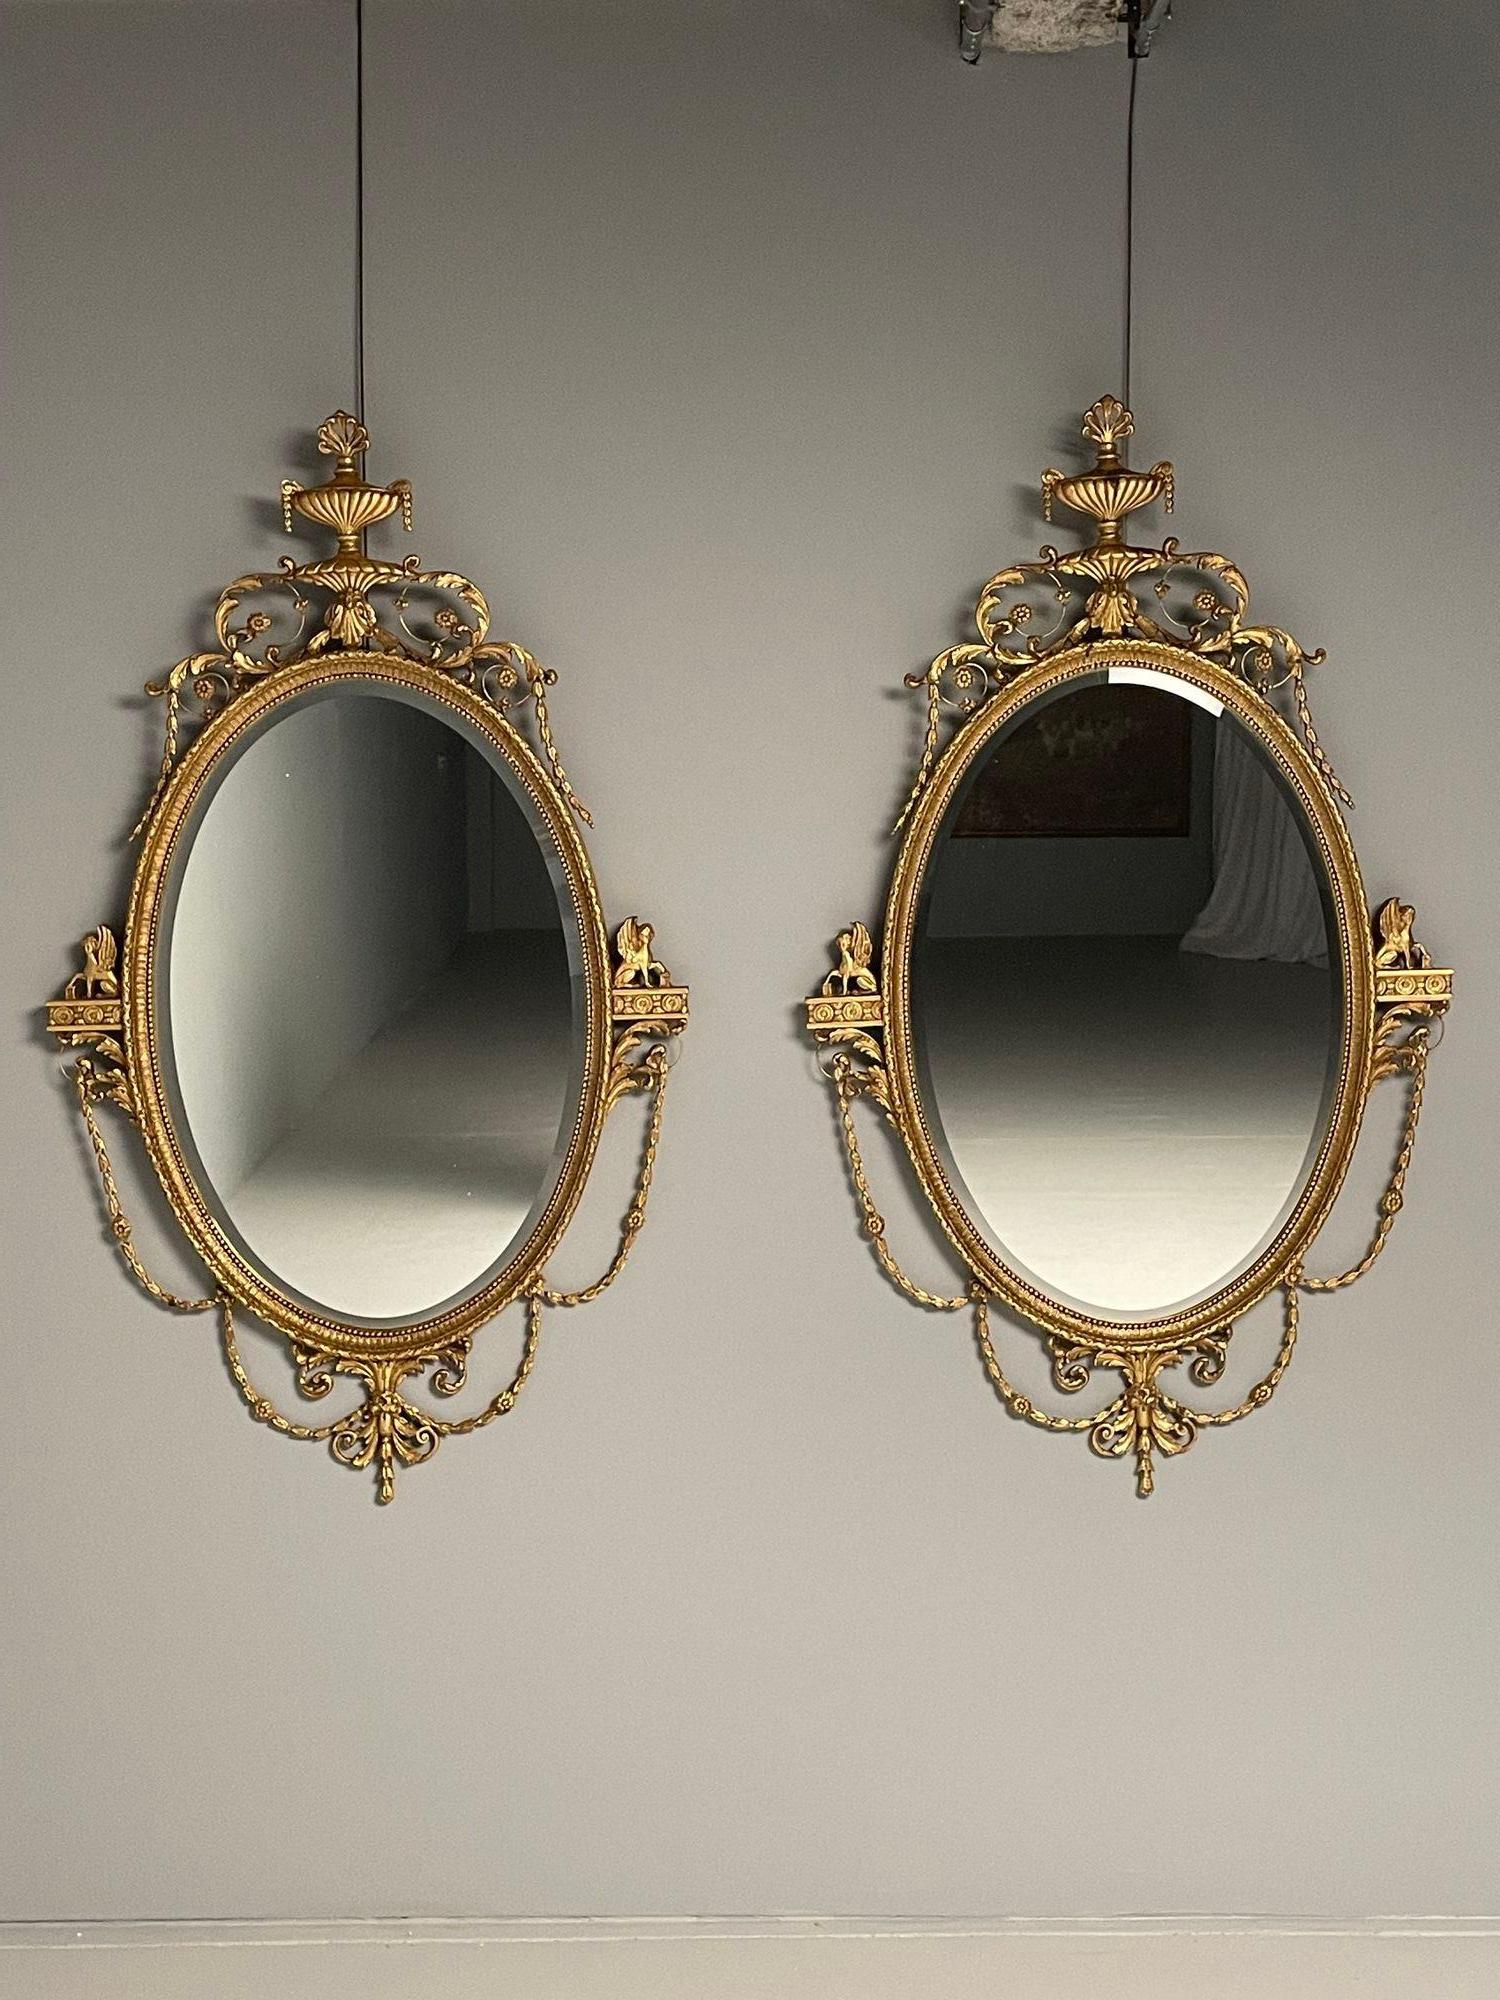 Friedman Brothers, English Regency Style, Oval Wall Mirrors, Giltwood, Gesso For Sale 1